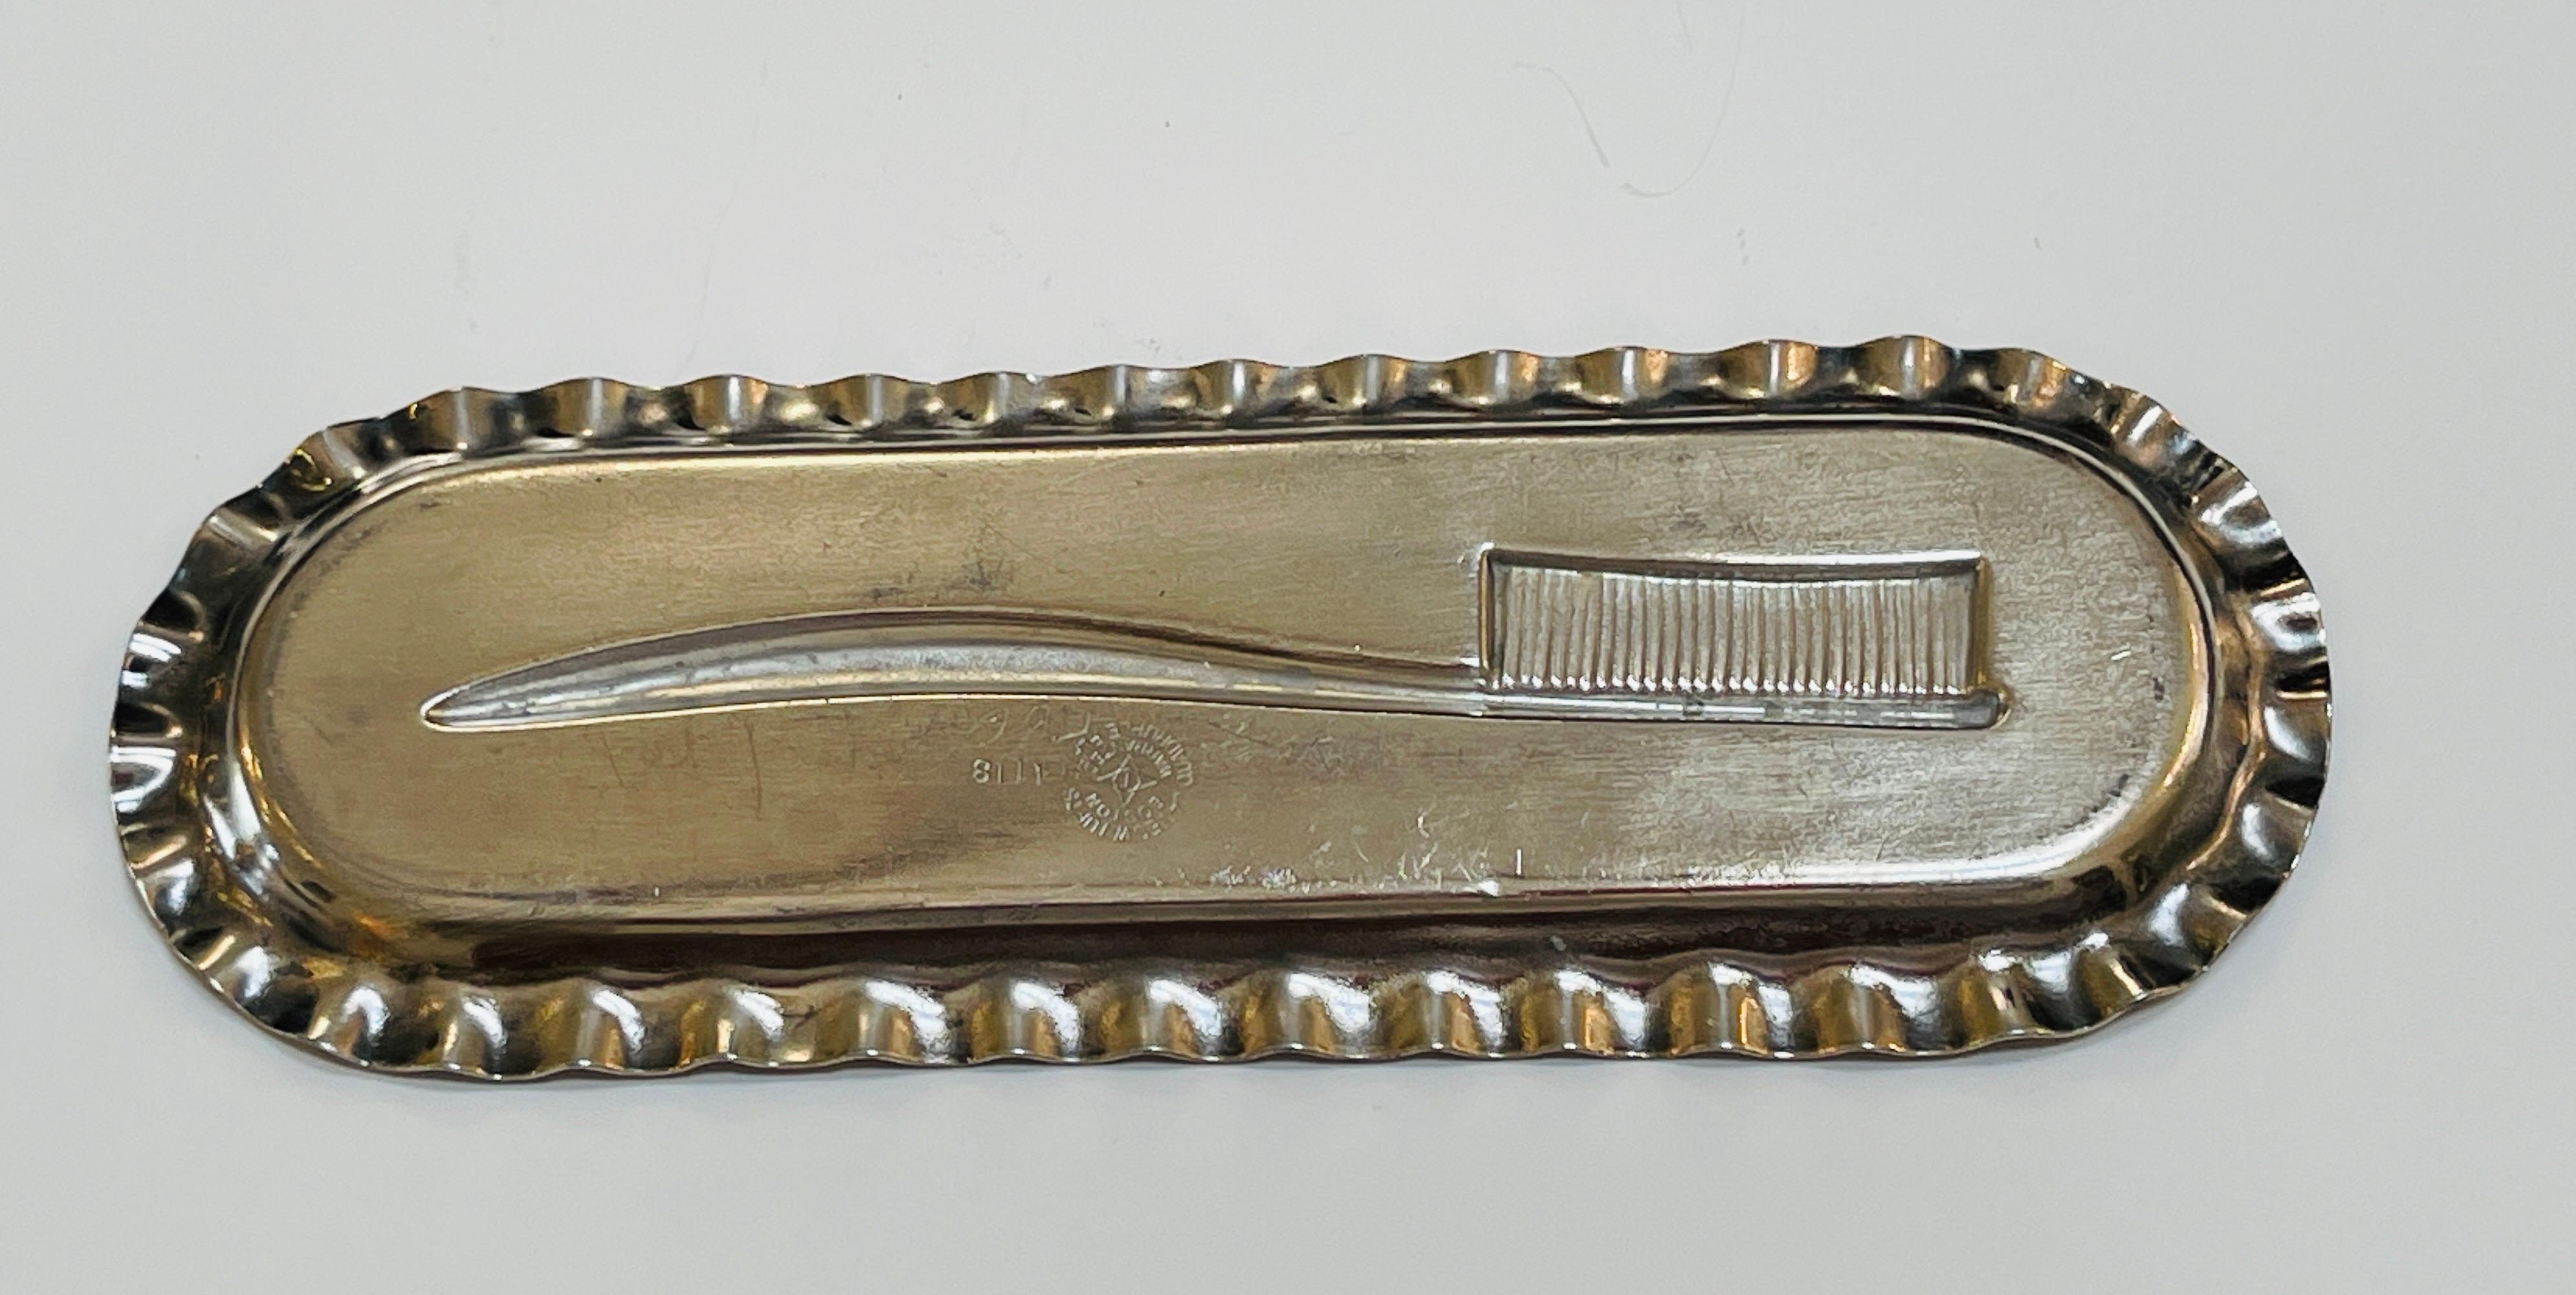 Victorian Silverplated Toothbrush Tray & Brush Set by James W. Tufts Co, Boston In Good Condition For Sale In West Palm Beach, FL